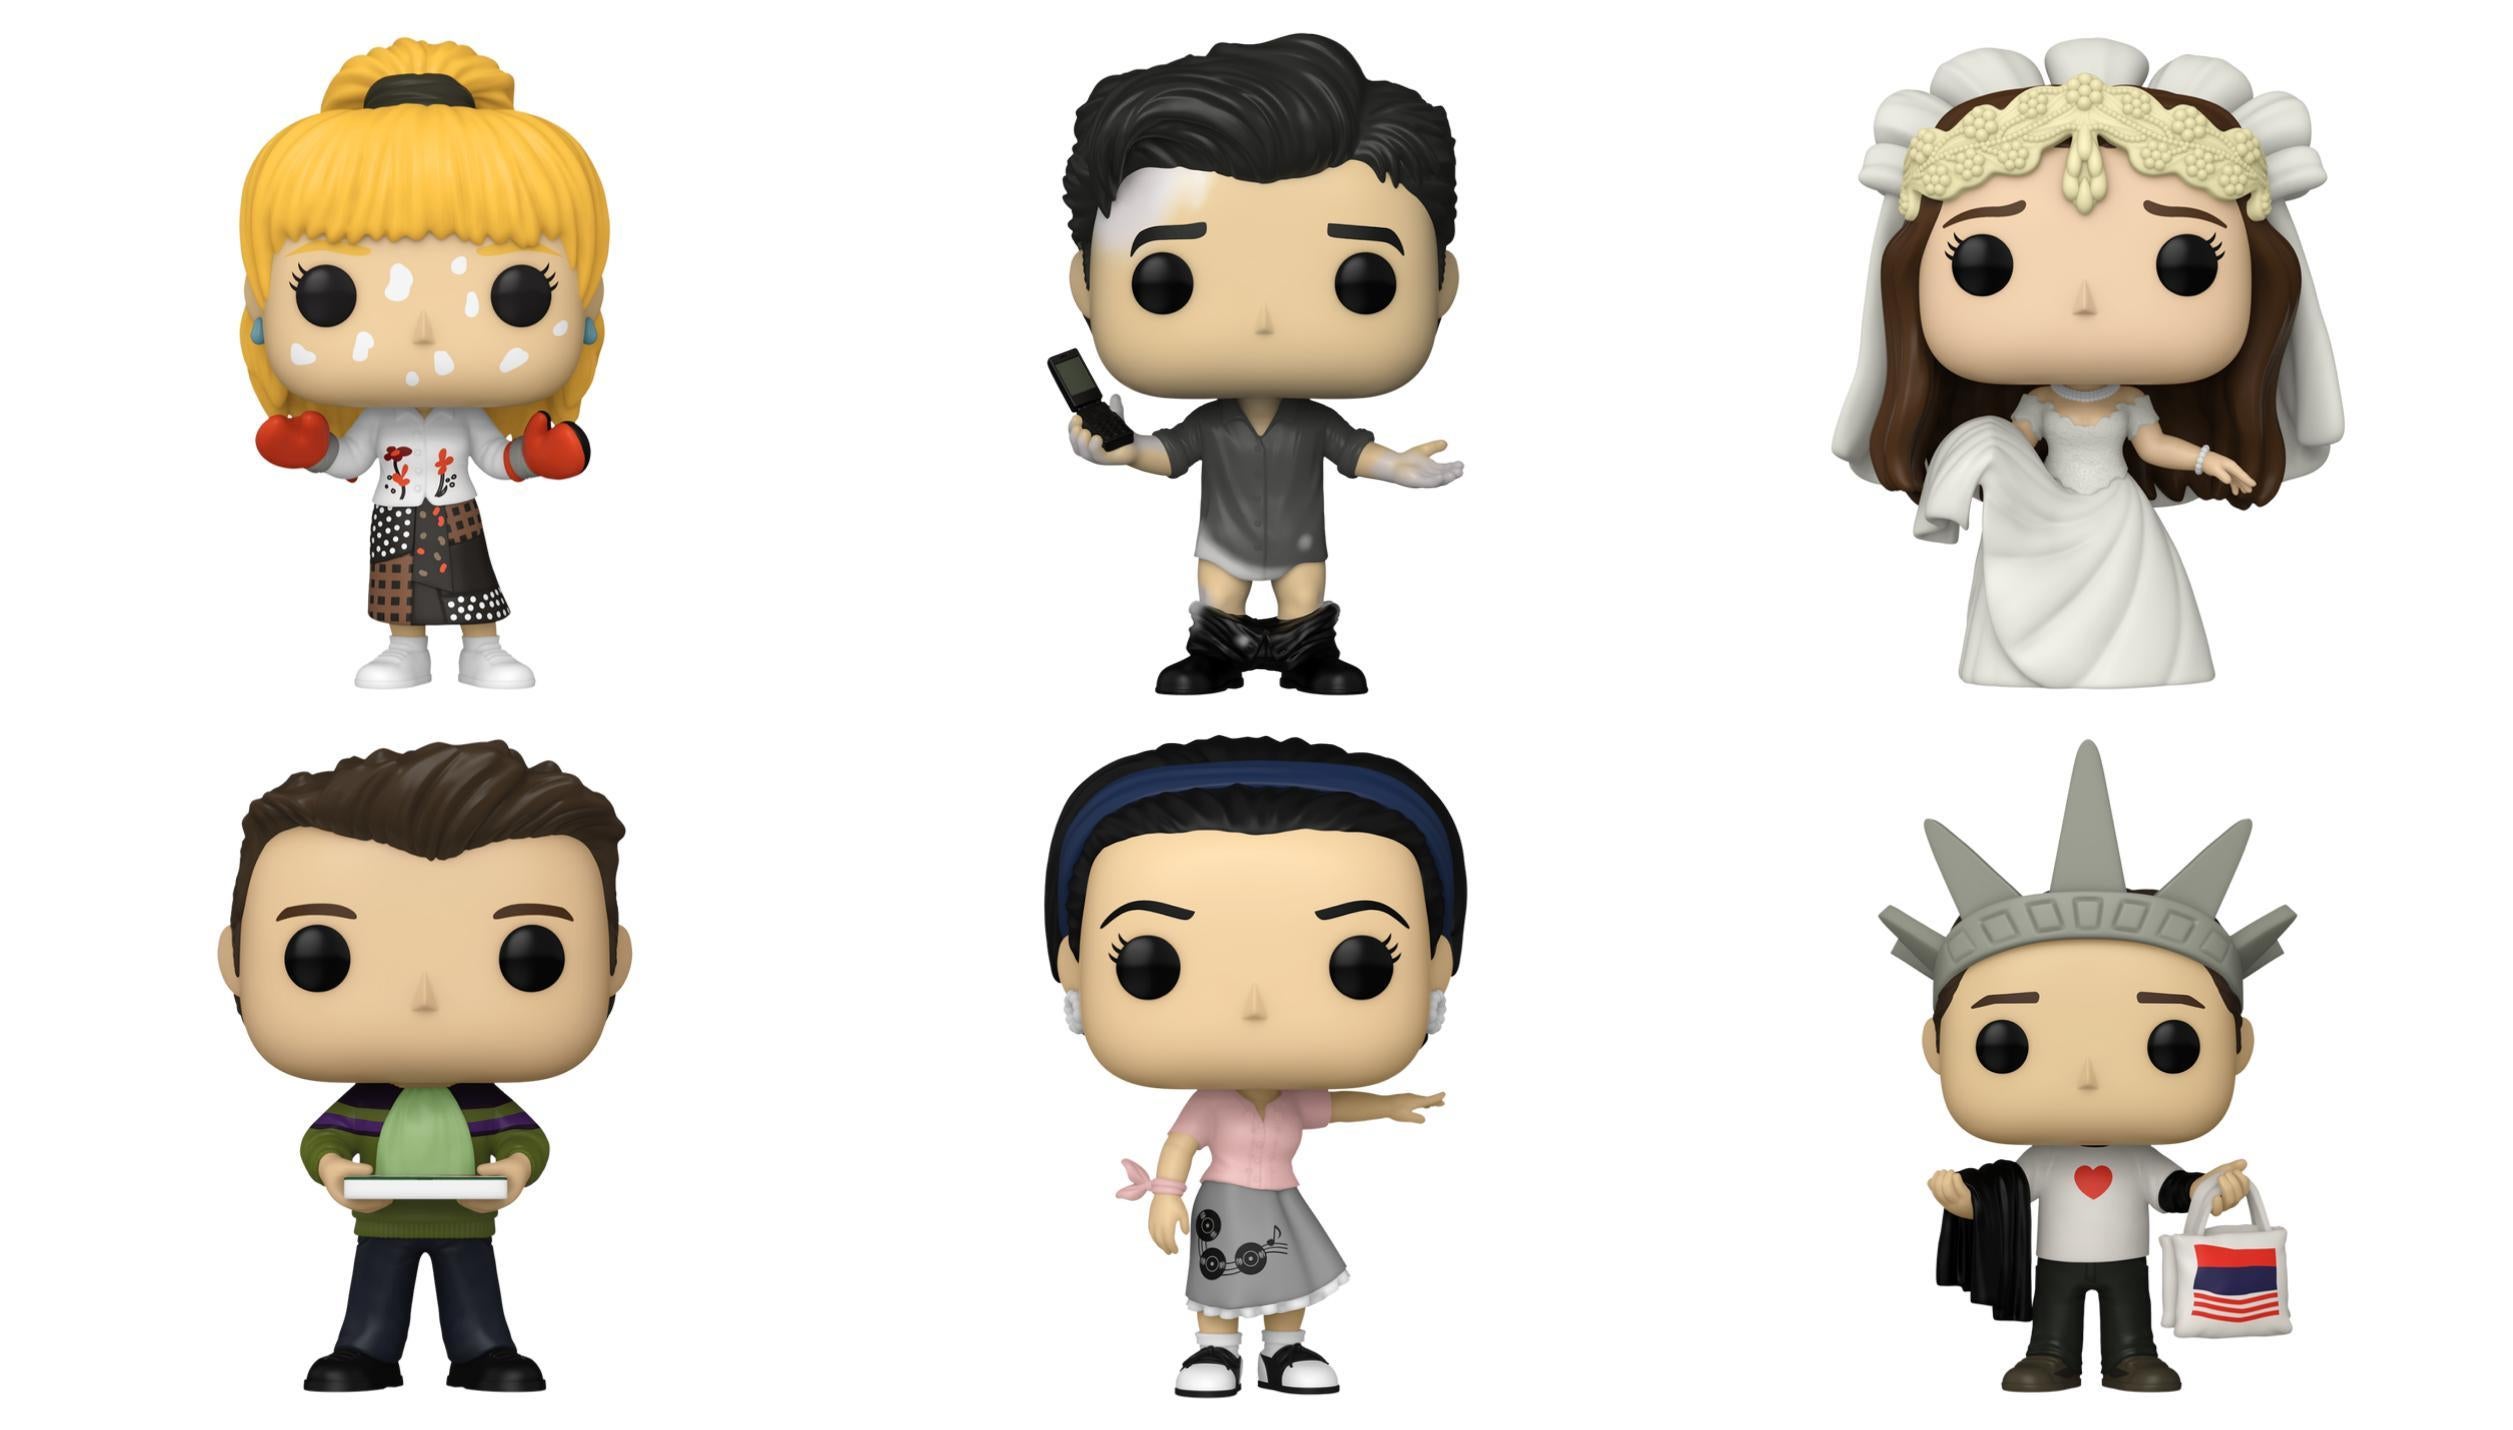 Friends Gets a New Wave of Funko Pops